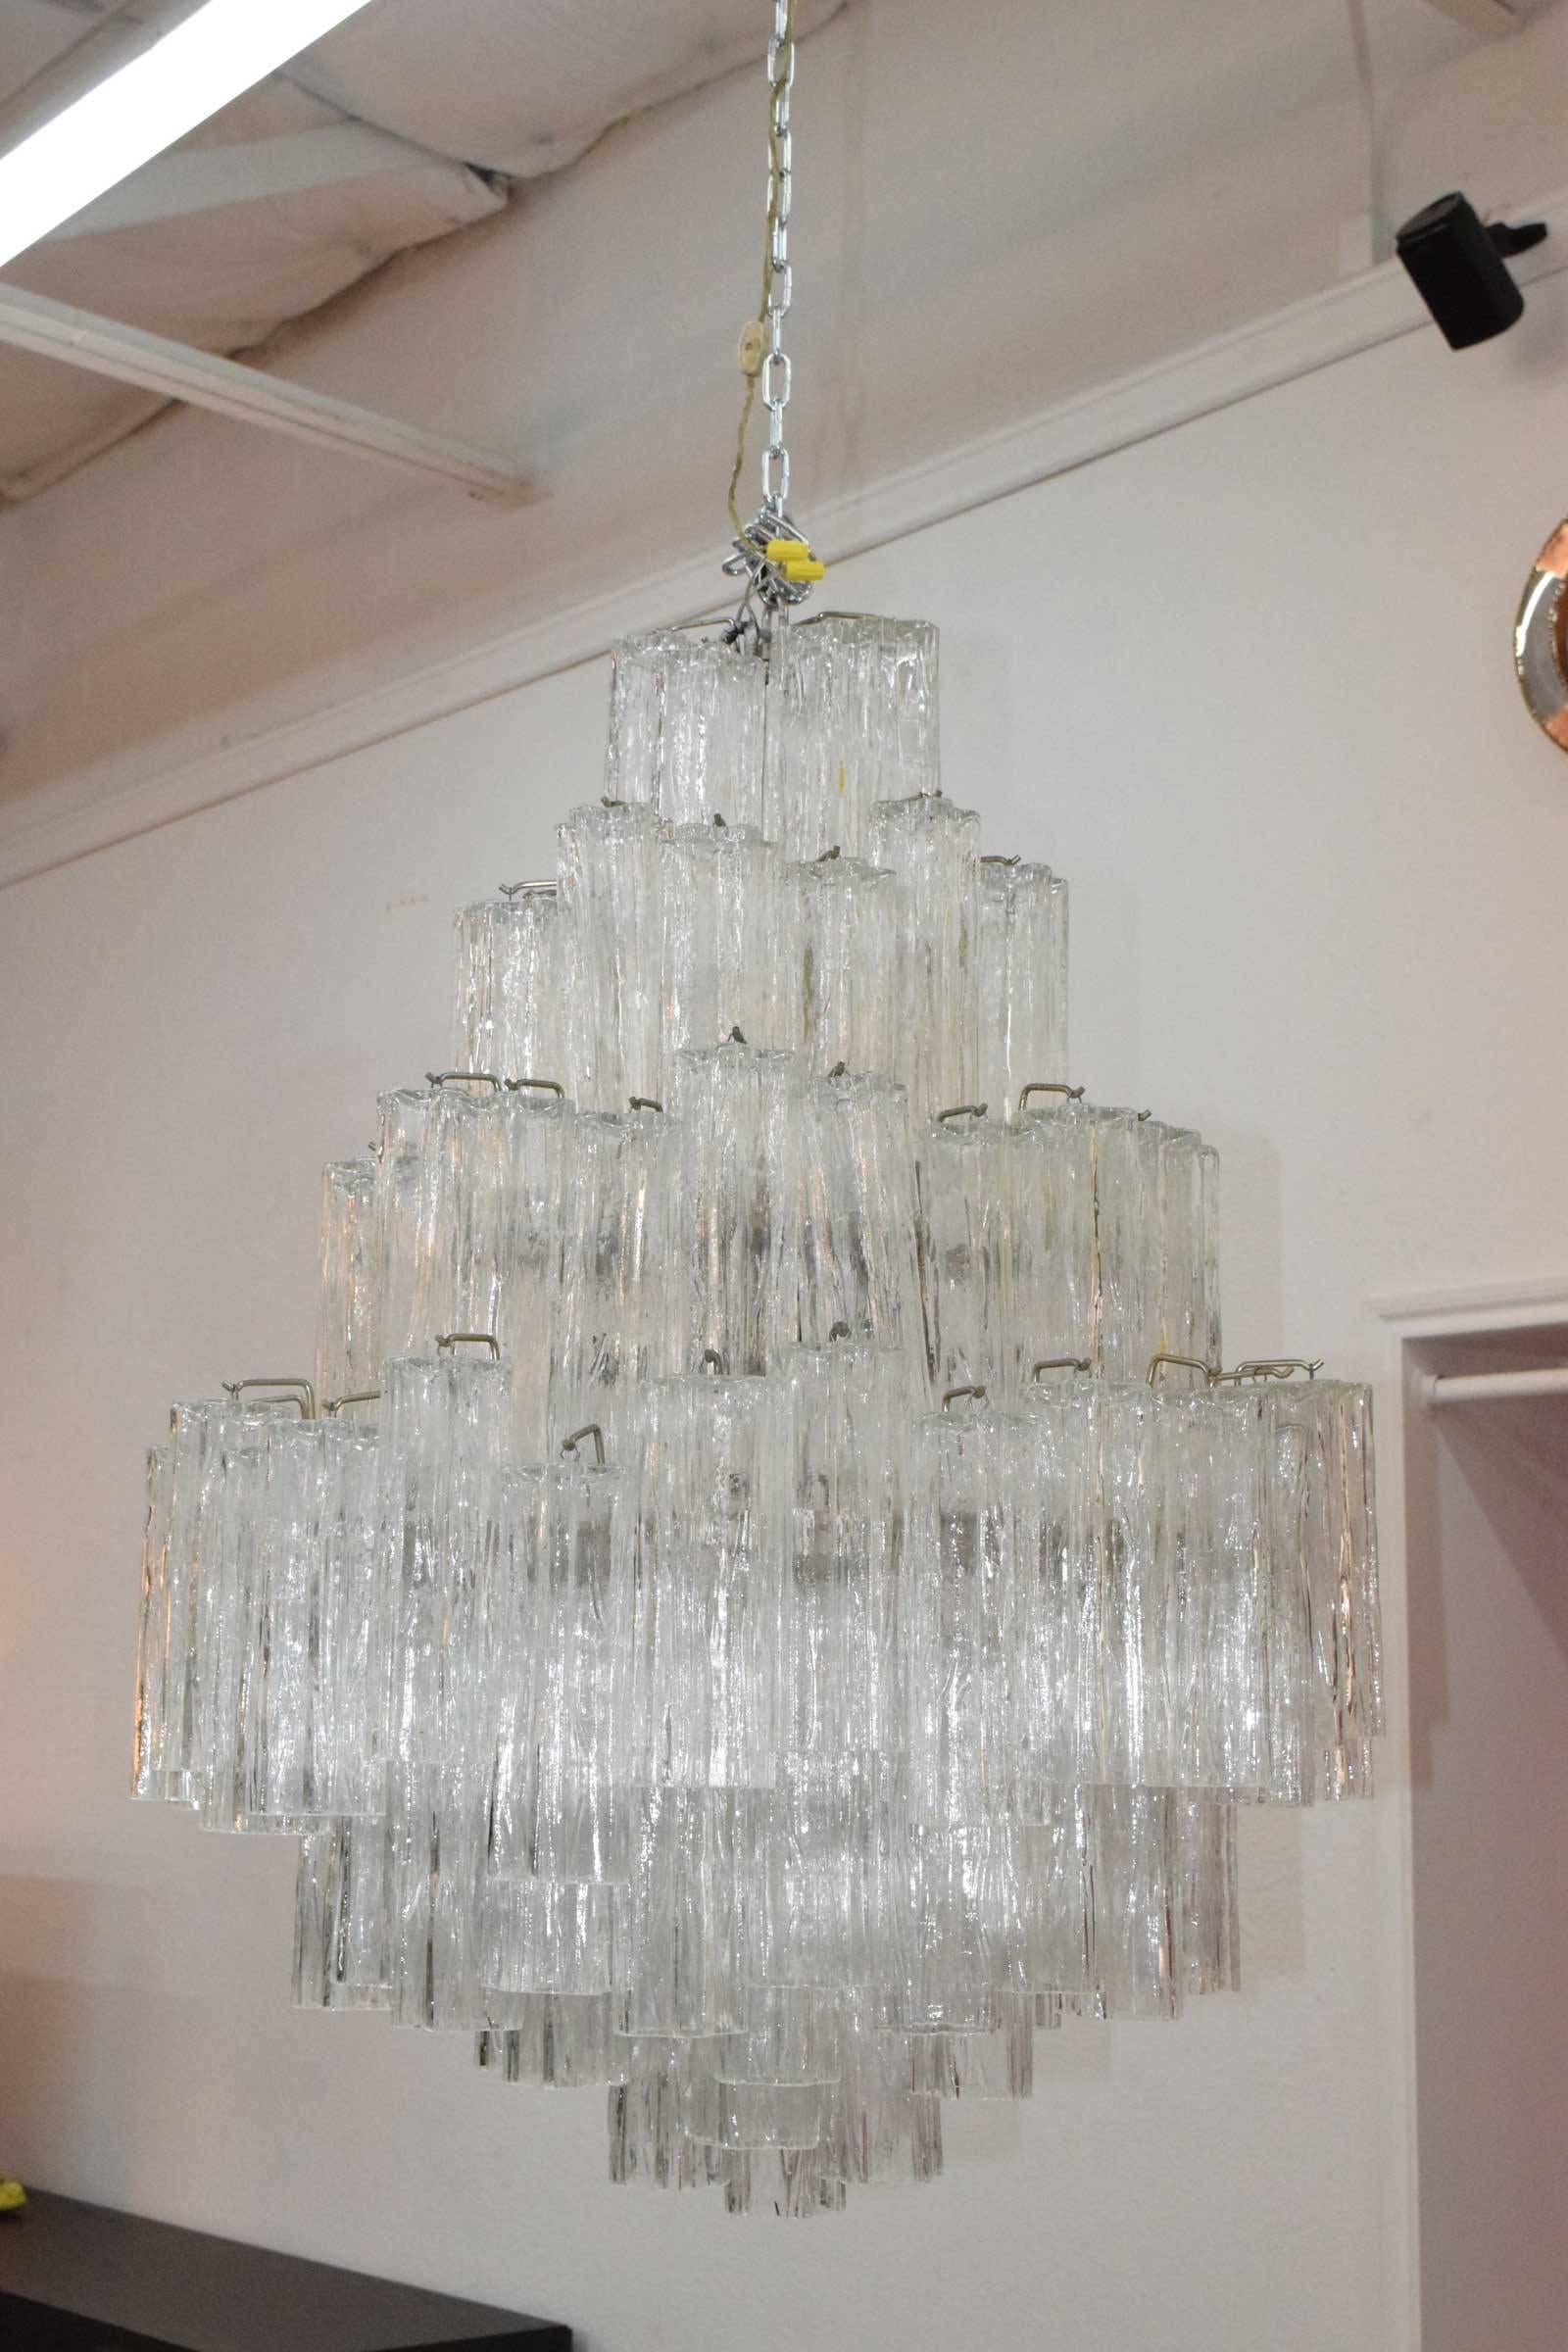 Chandelier has eight layers, 12 light sockets (not all lit in photograph), all crystals are present. Measures: 40